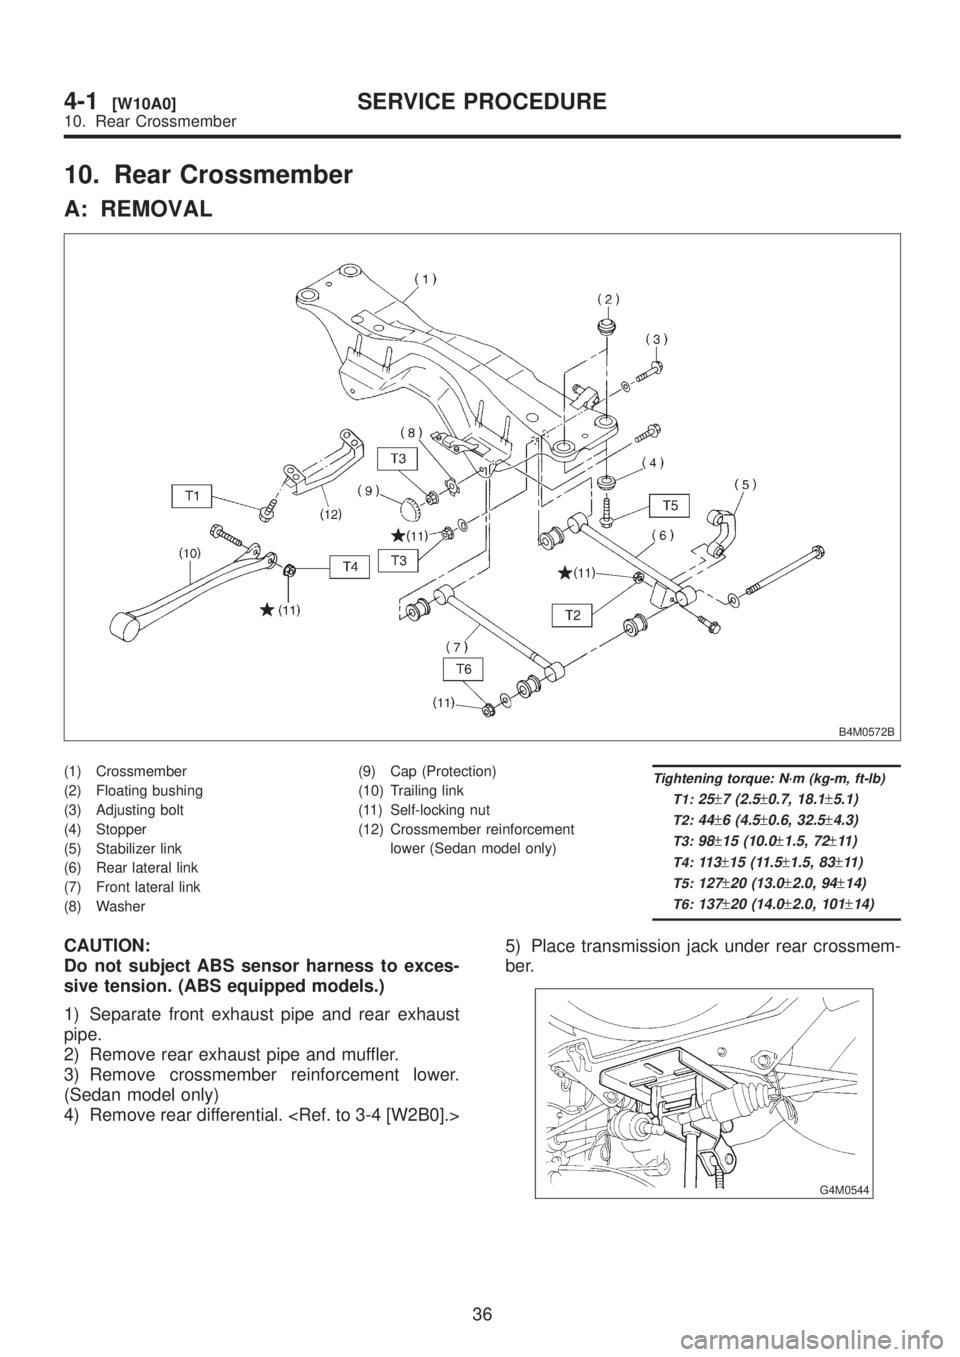 SUBARU LEGACY 1999  Service Repair Manual 10. Rear Crossmember
A: REMOVAL
B4M0572B
(1) Crossmember
(2) Floating bushing
(3) Adjusting bolt
(4) Stopper
(5) Stabilizer link
(6) Rear lateral link
(7) Front lateral link
(8) Washer(9) Cap (Protect